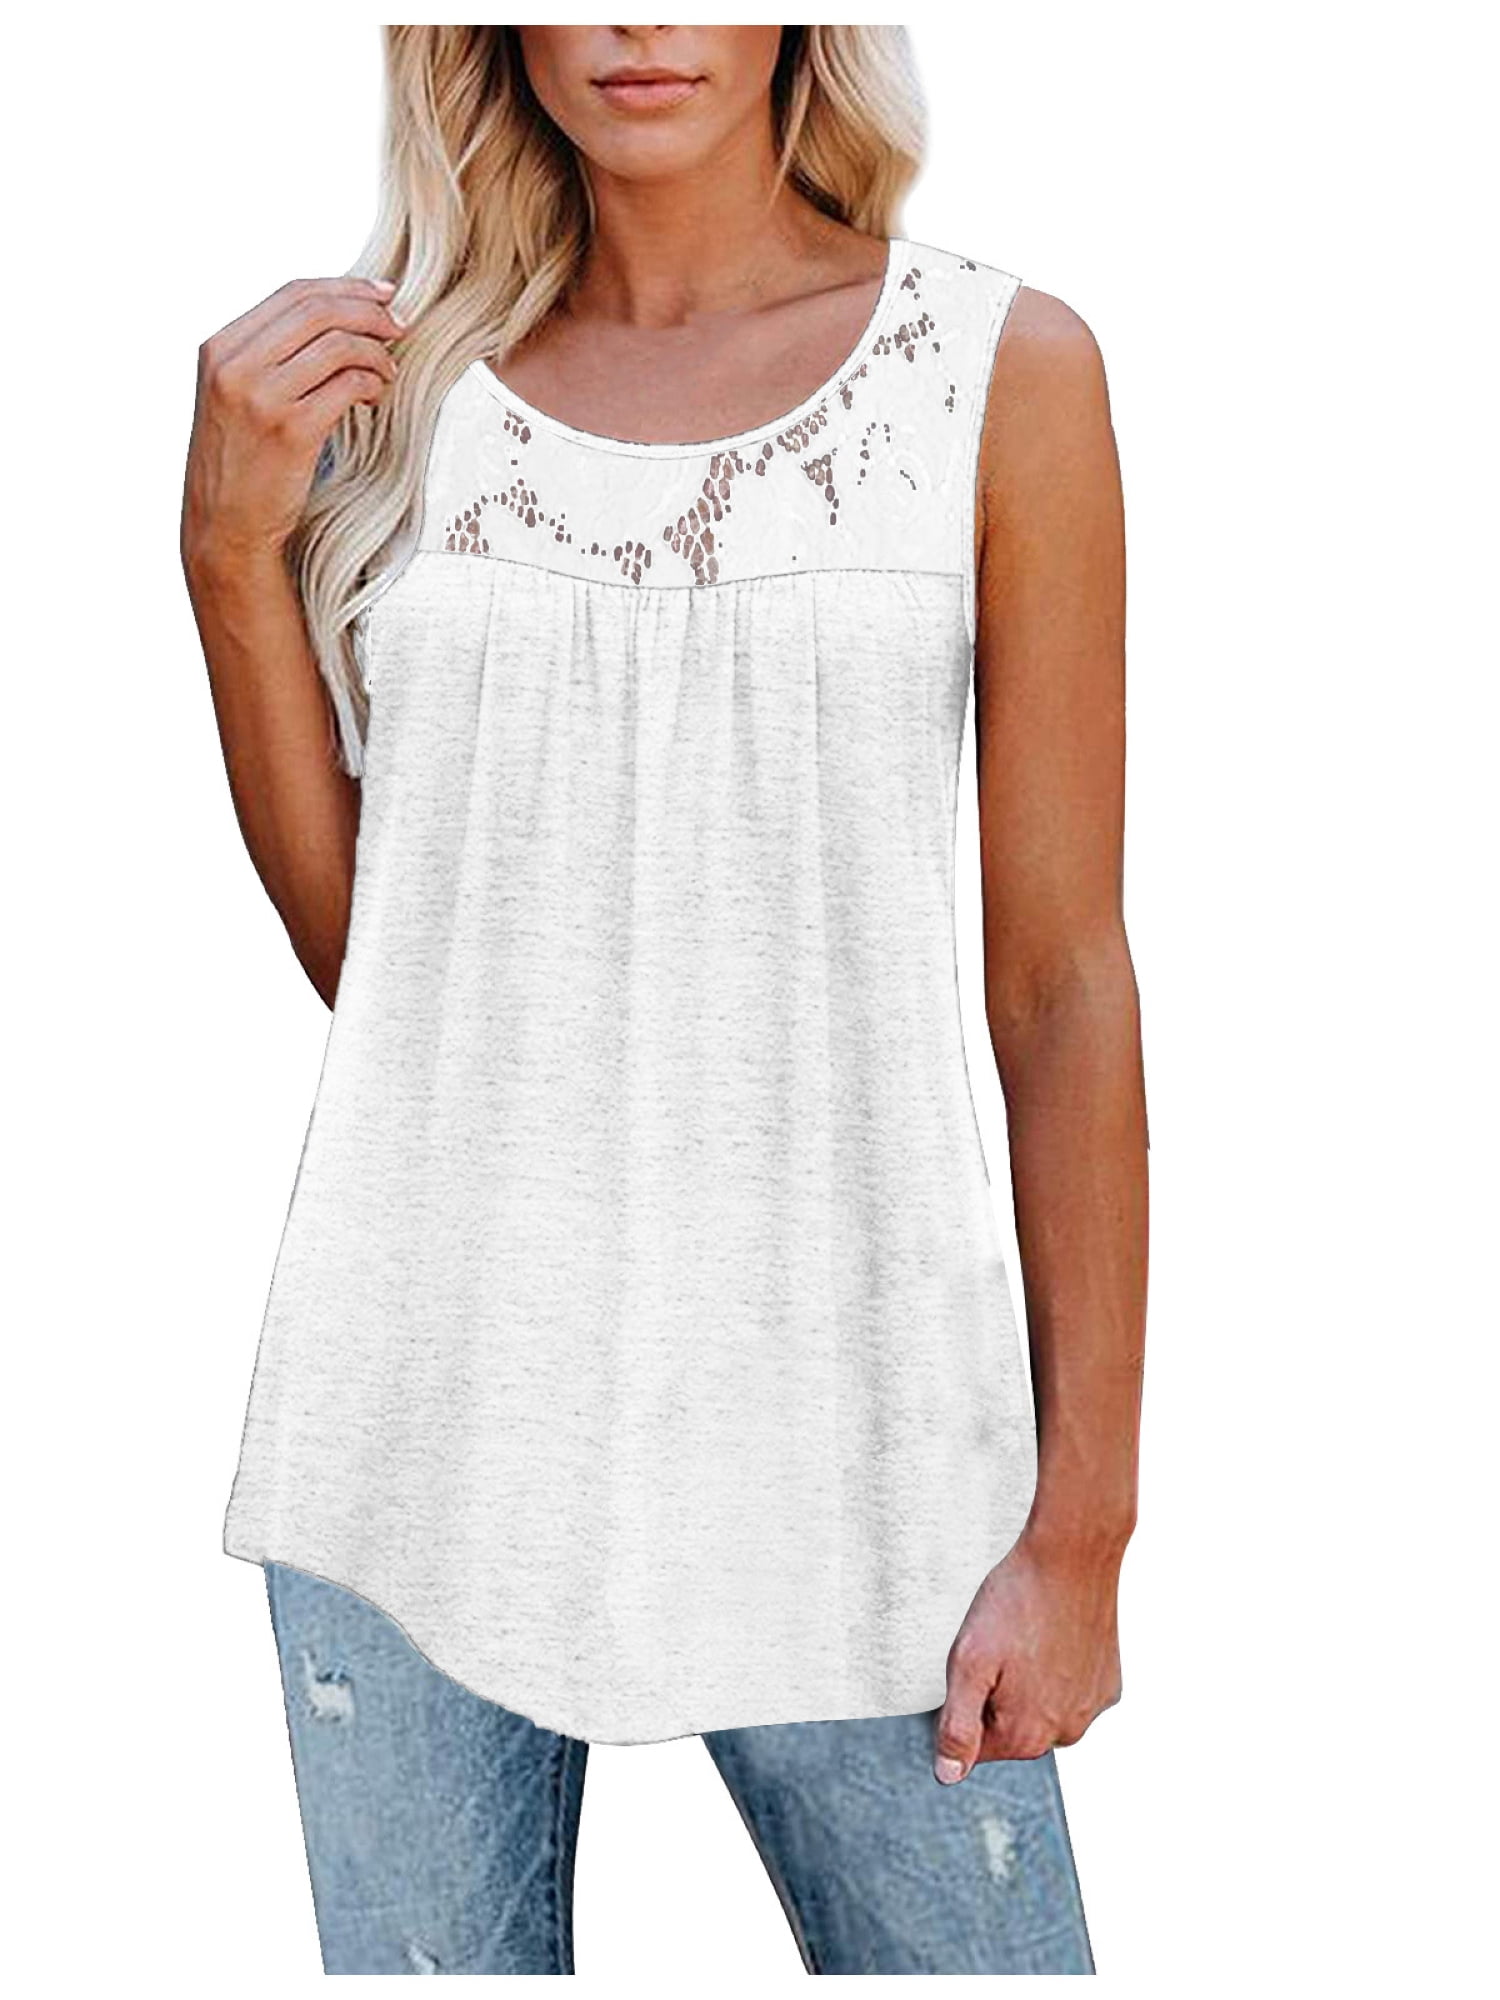 Sleeveless Tank Tops Womens Crewneck Lace Tunic Tops Embroidery Flowy  Blouses Shirts Plus Size 